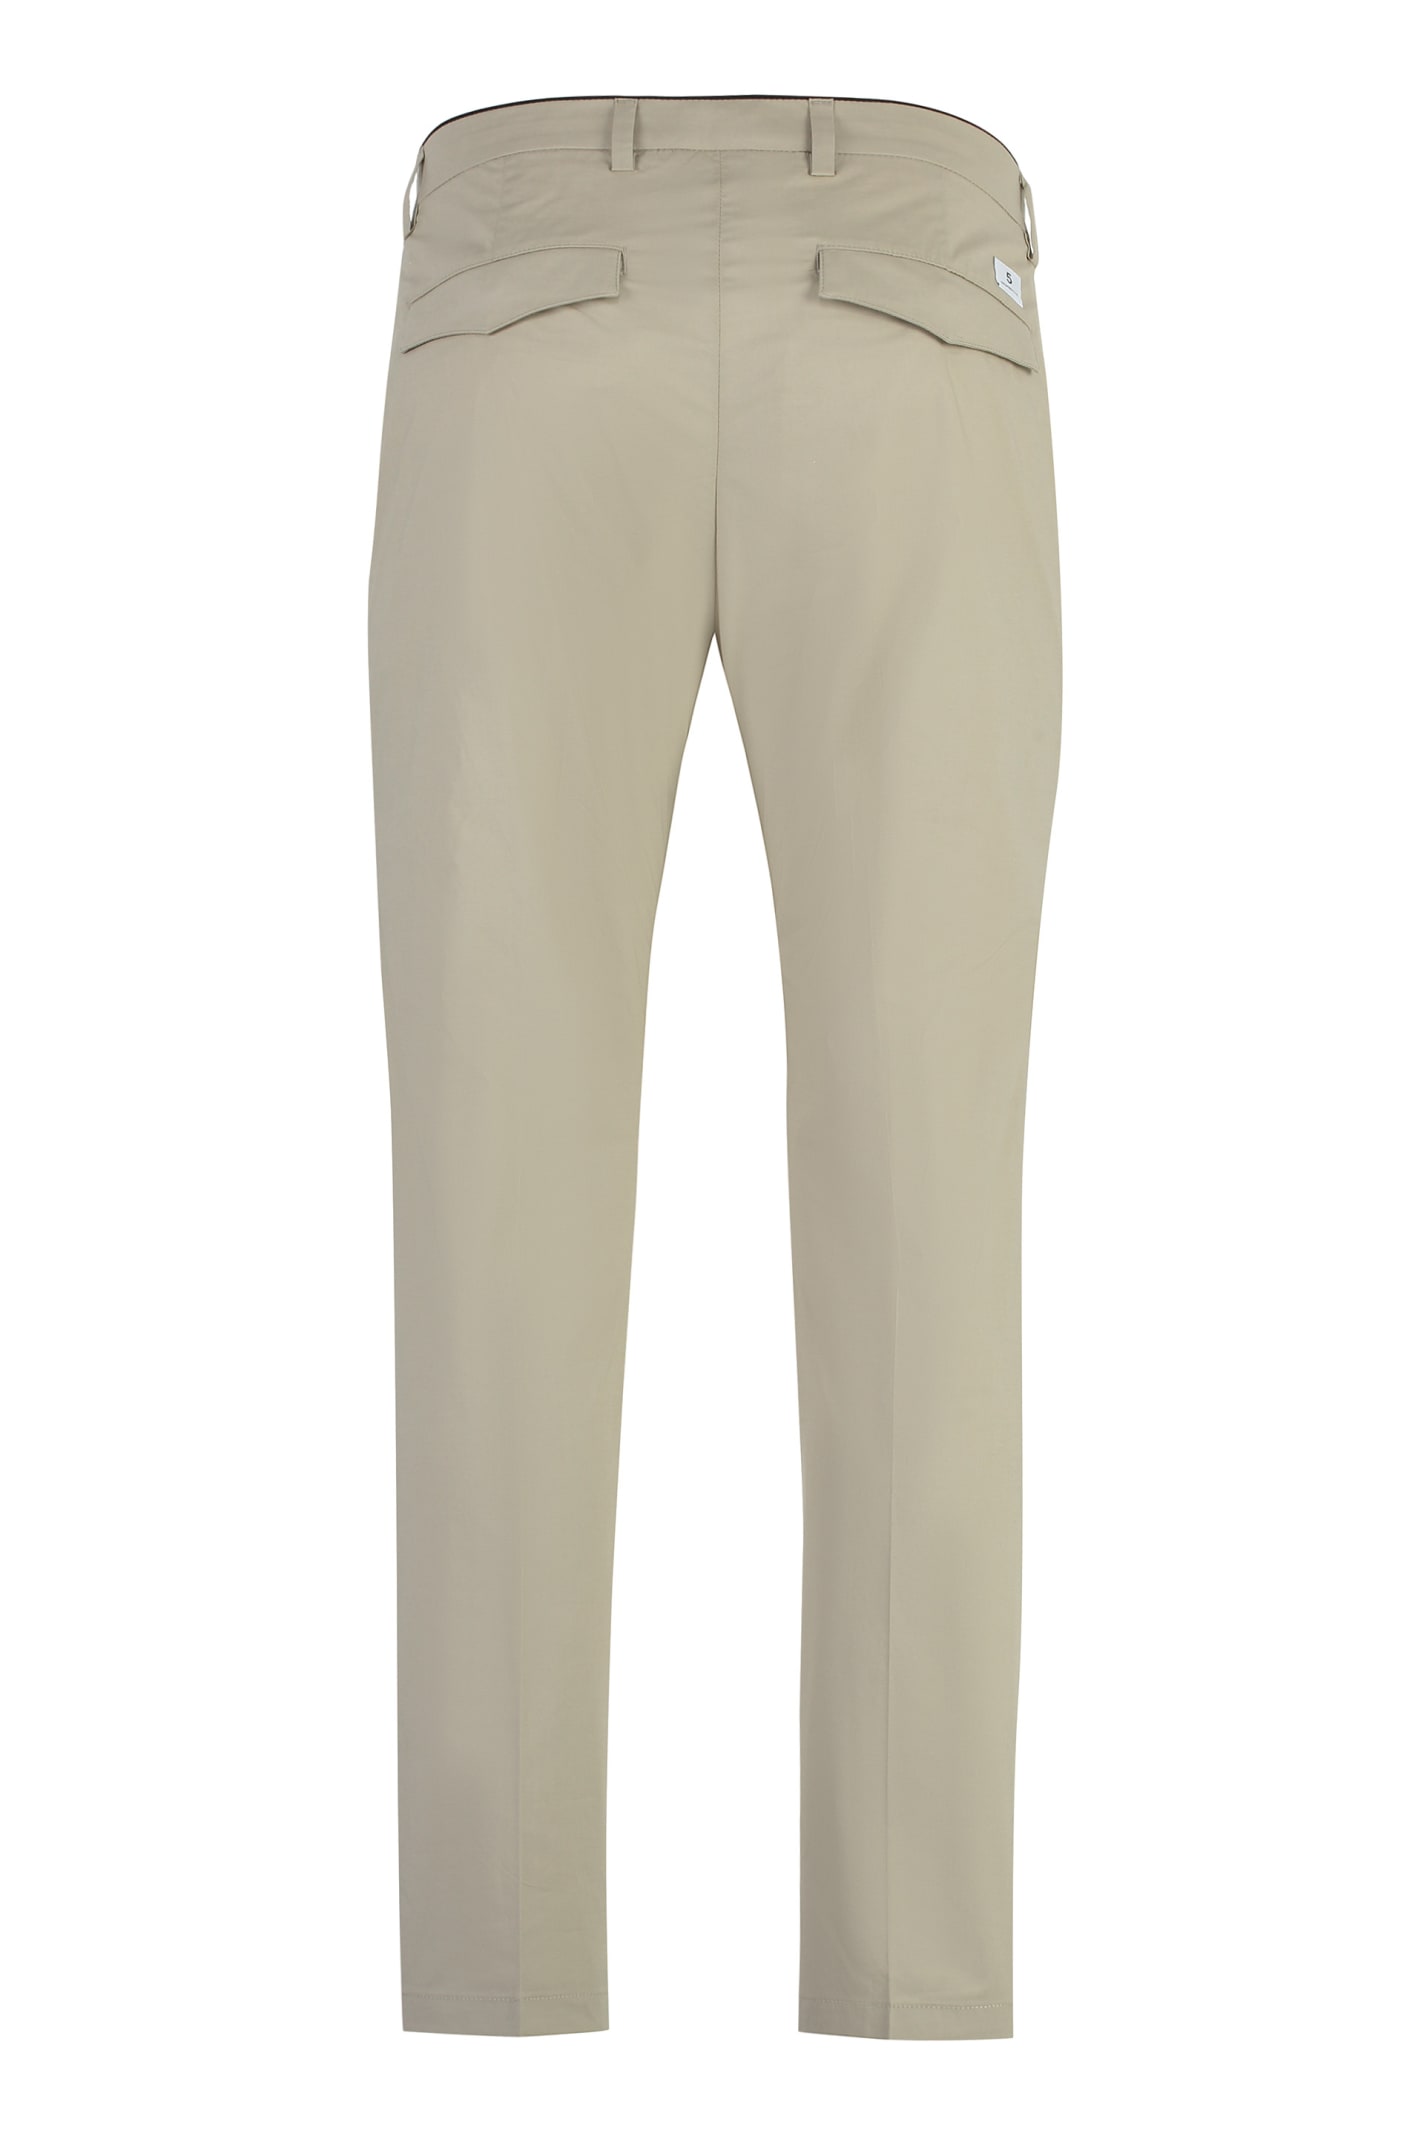 Shop Department Five Prince Chino Pants In Beige